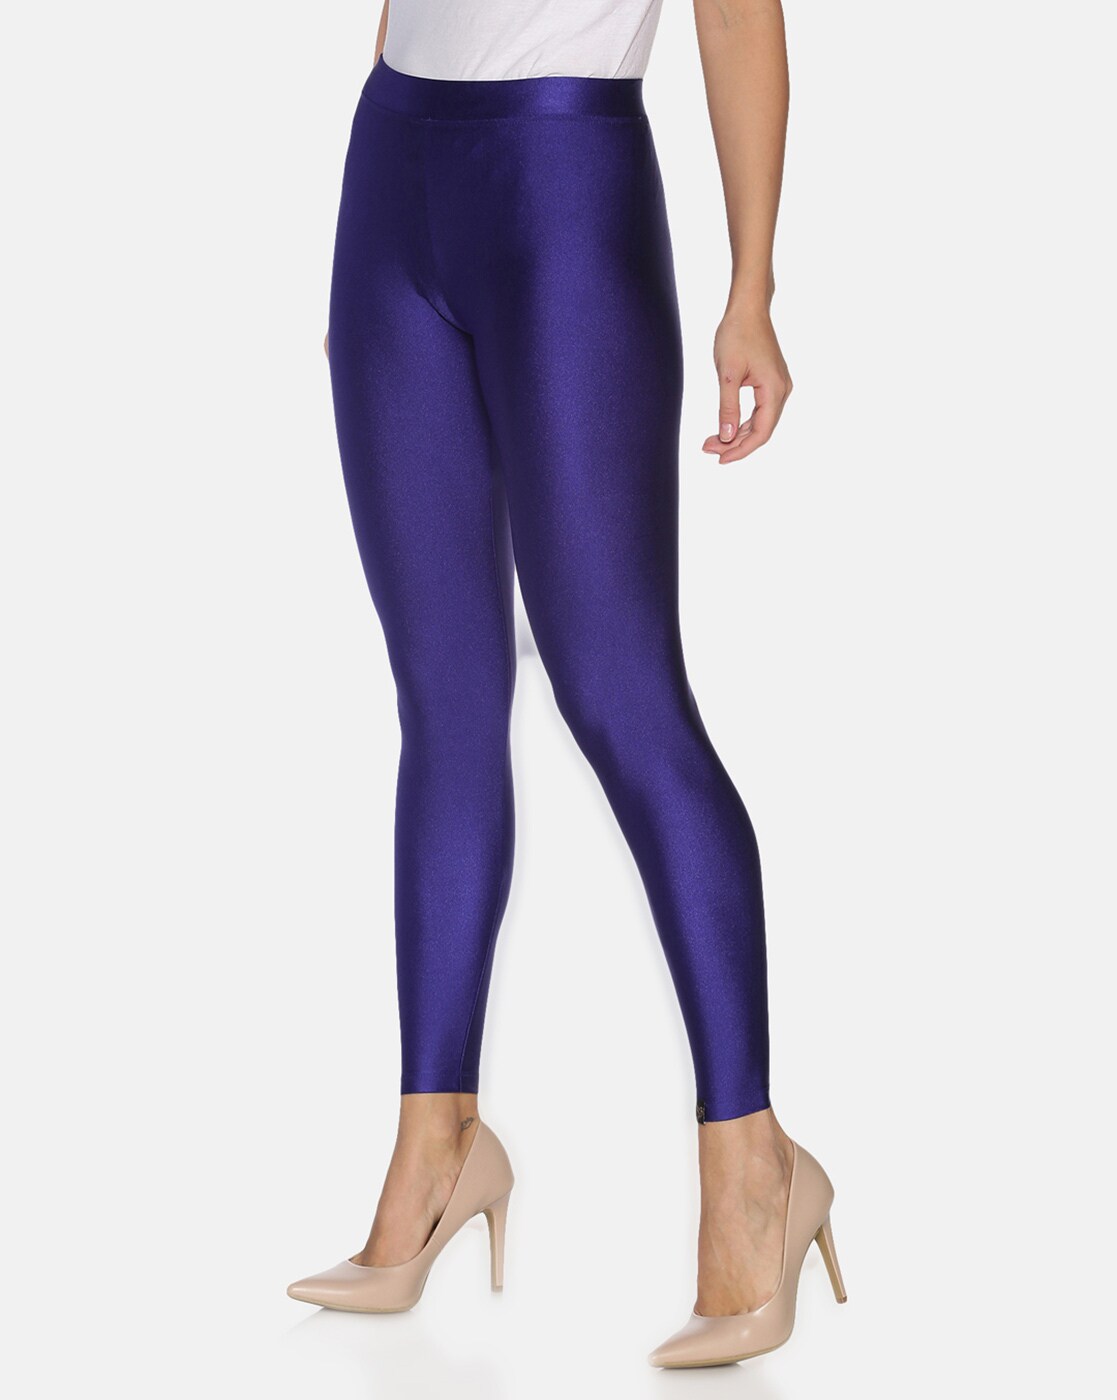 Discover 104+ royal blue leggings online india latest